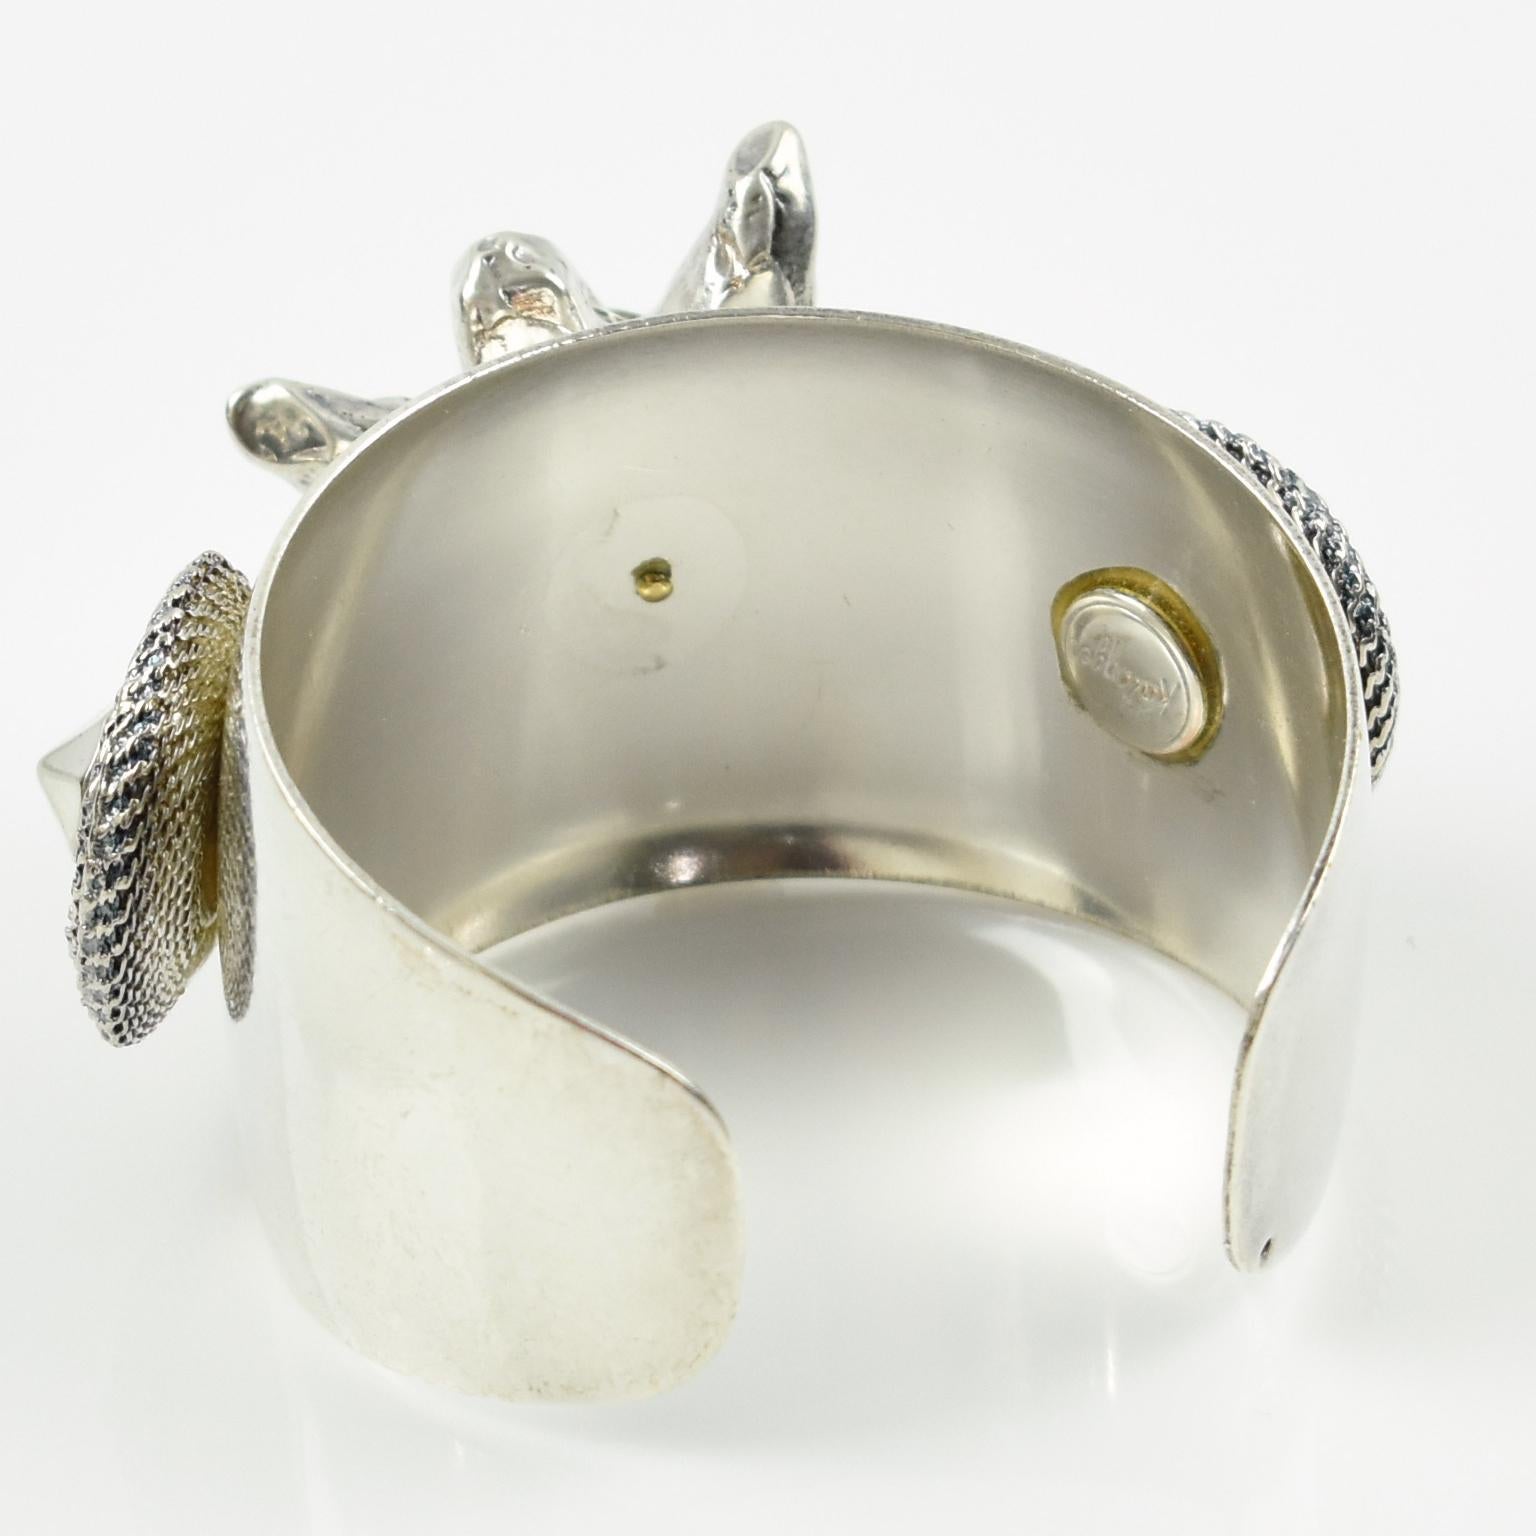 Kalinger Paris Silver Plate Metal and Resin Floral Cuff Bracelet In Excellent Condition For Sale In Atlanta, GA